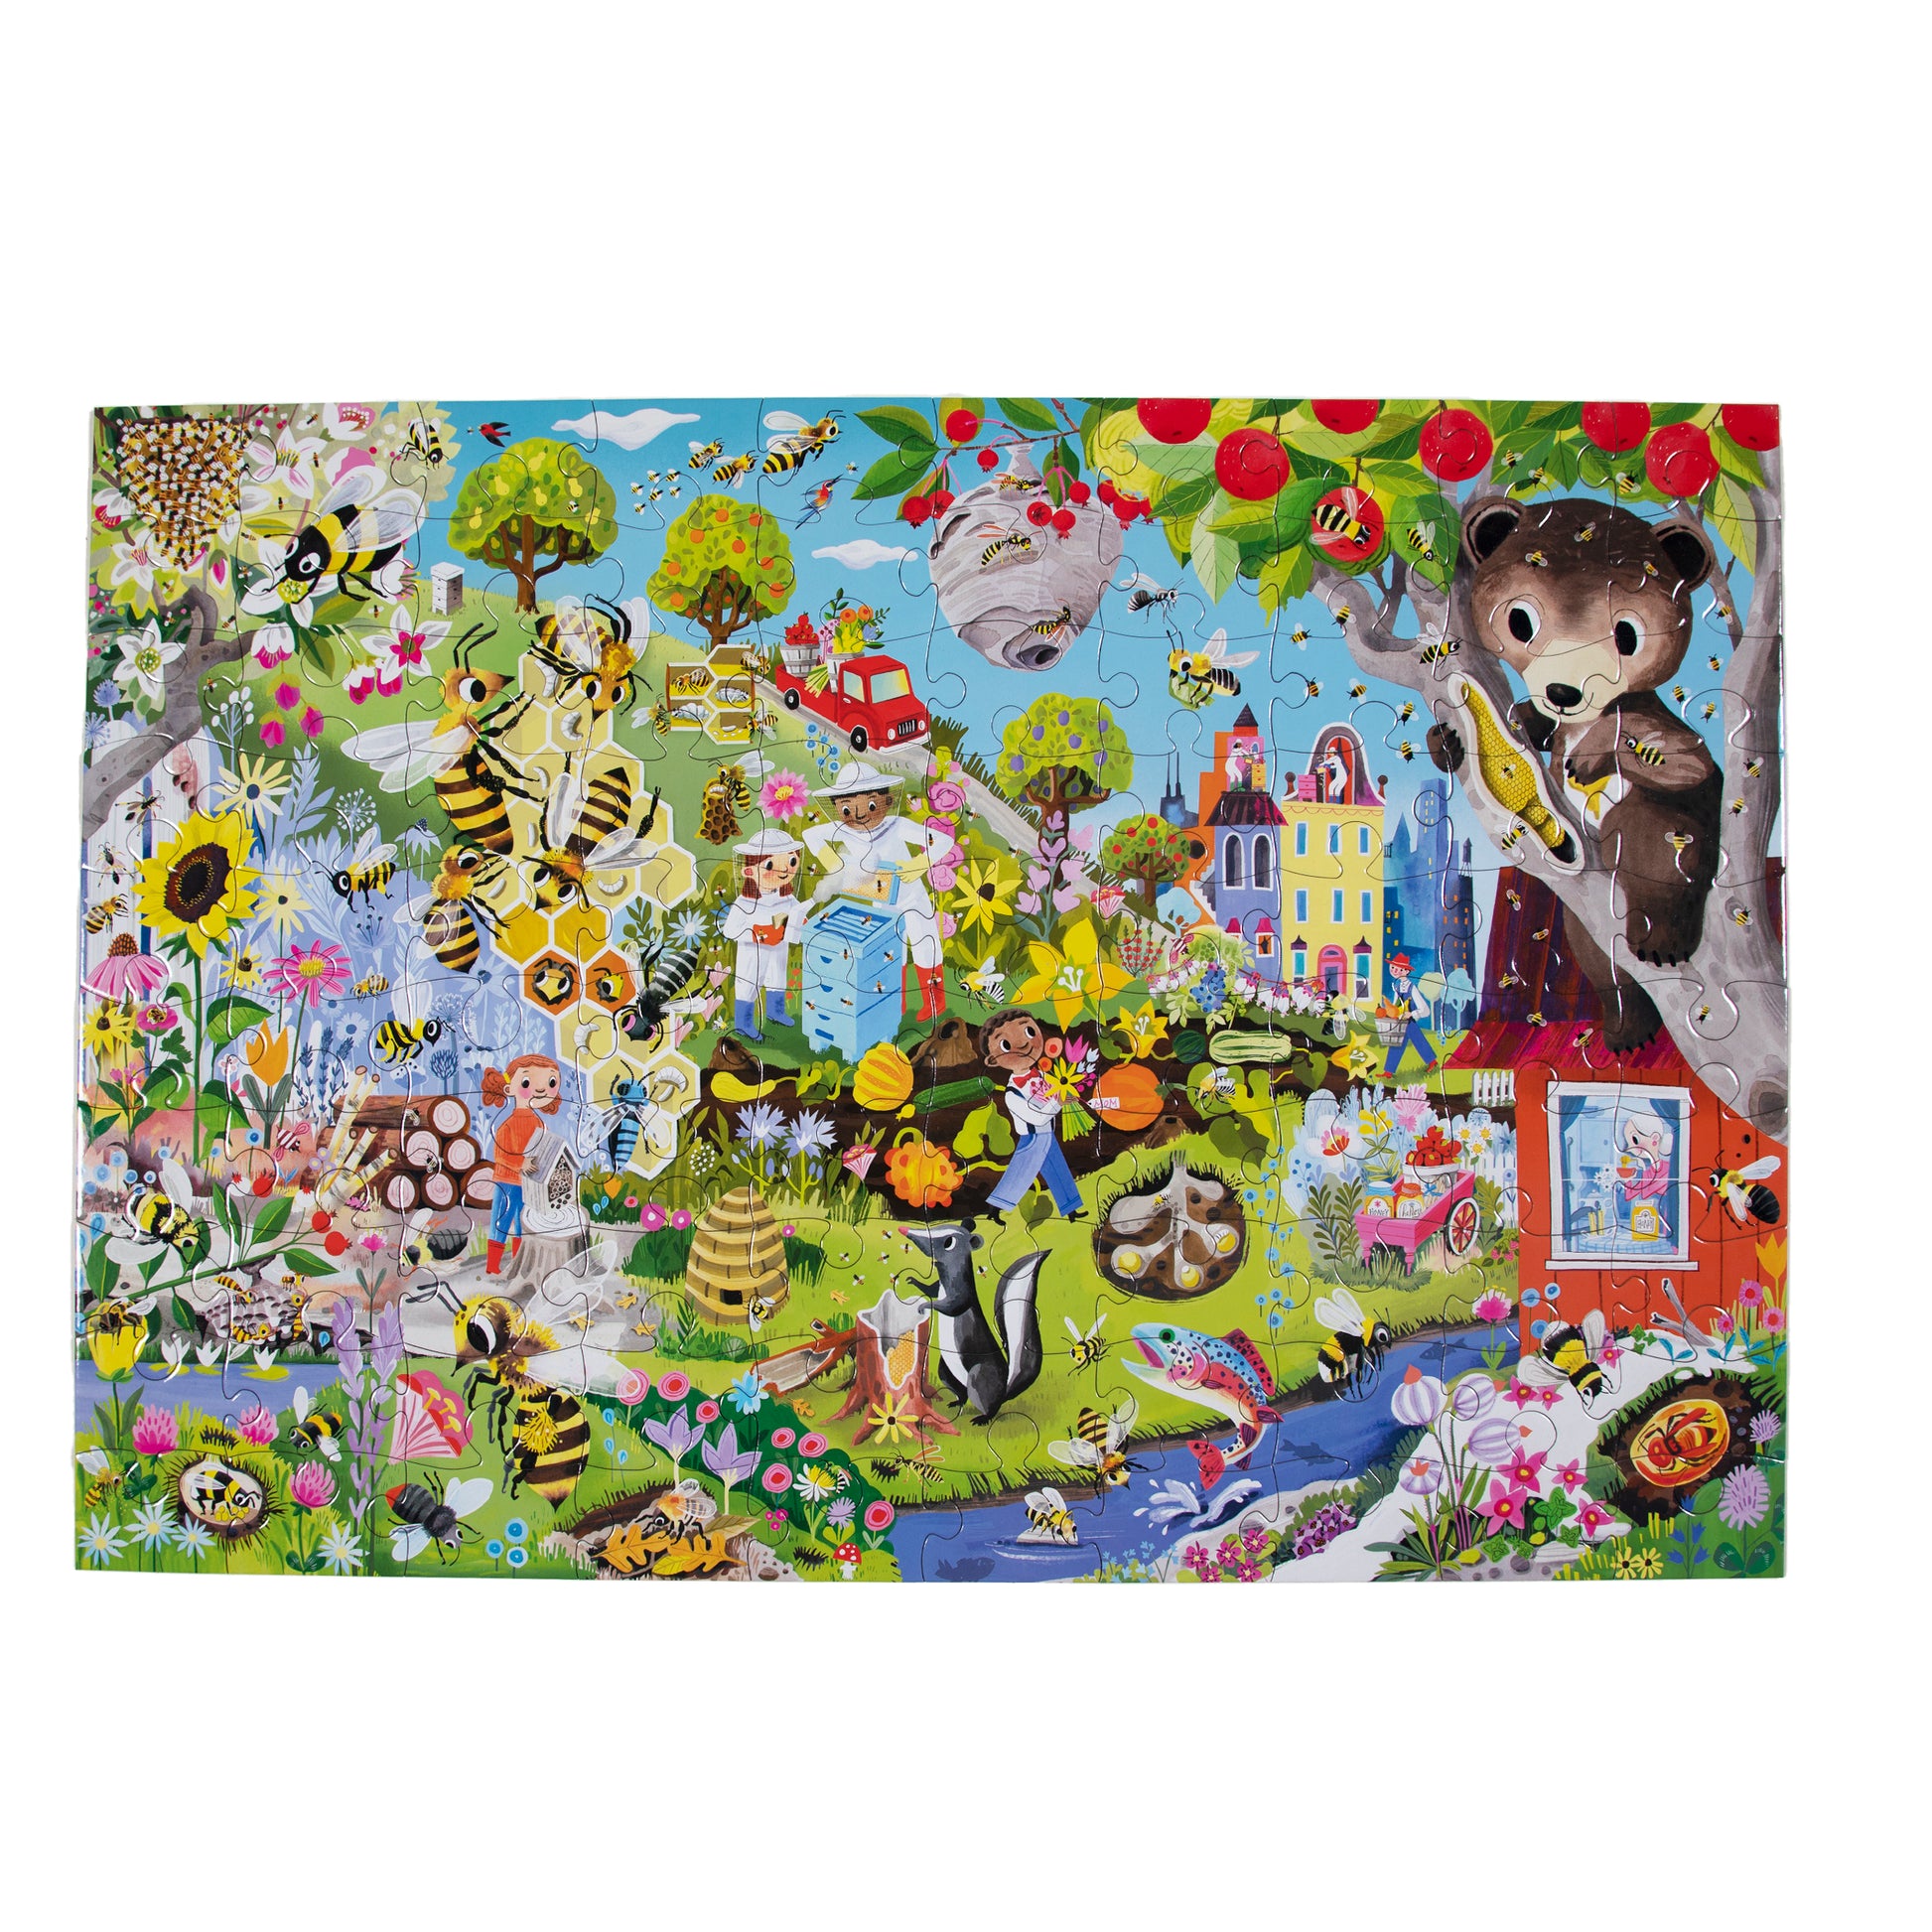 Love of Bees 100 Piece Jigsaw Puzzle eeBoo Gifts for Kids 5+